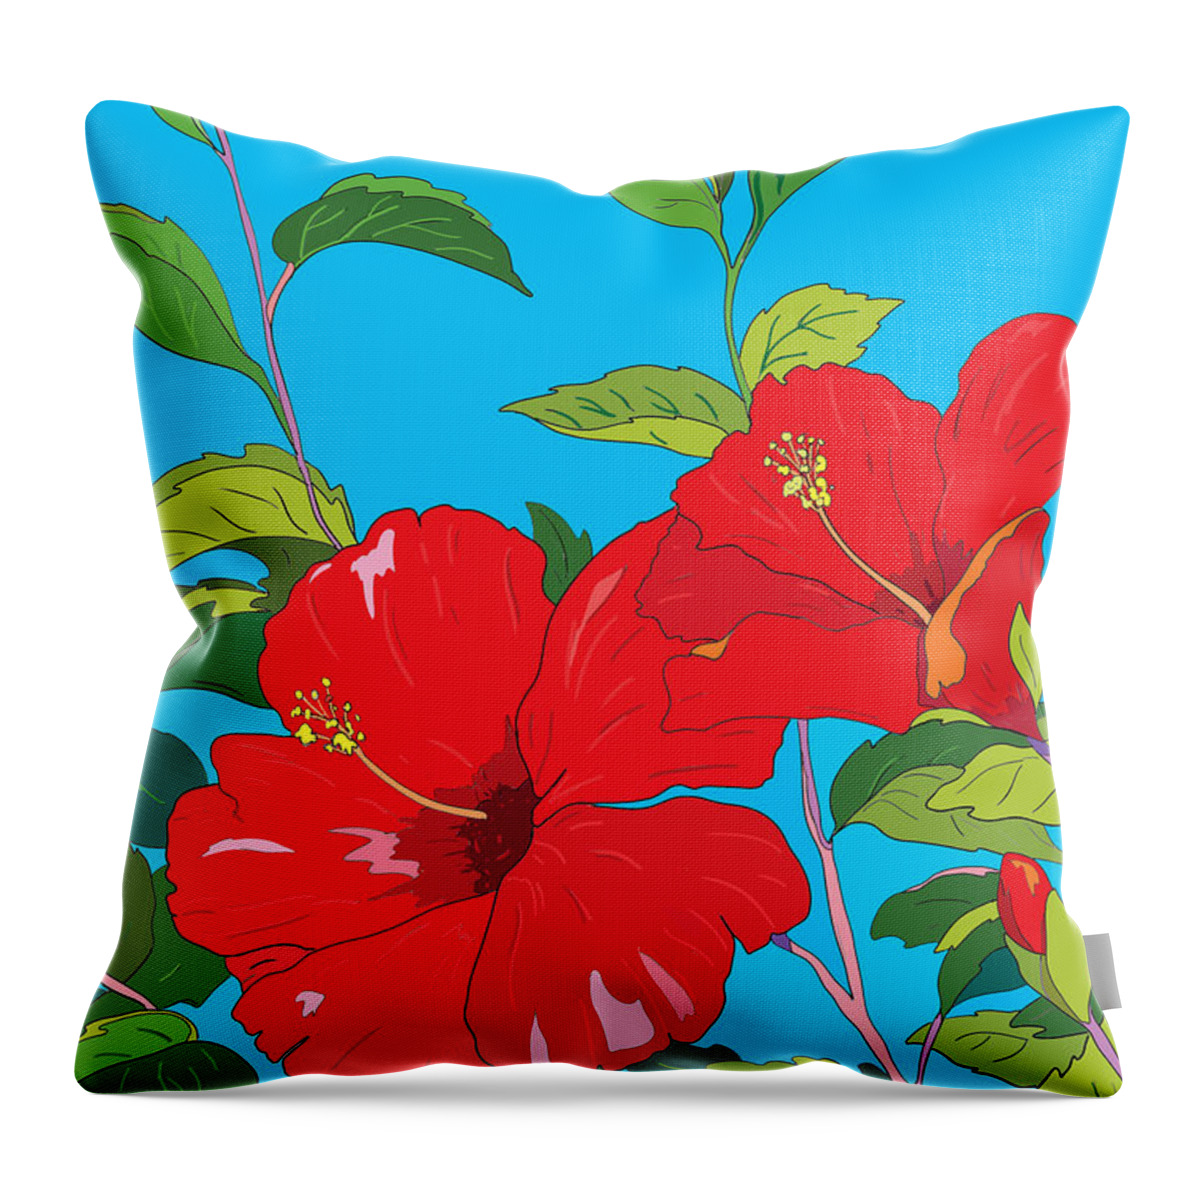 Red Throw Pillow featuring the digital art Red Hibiscus by John Clark